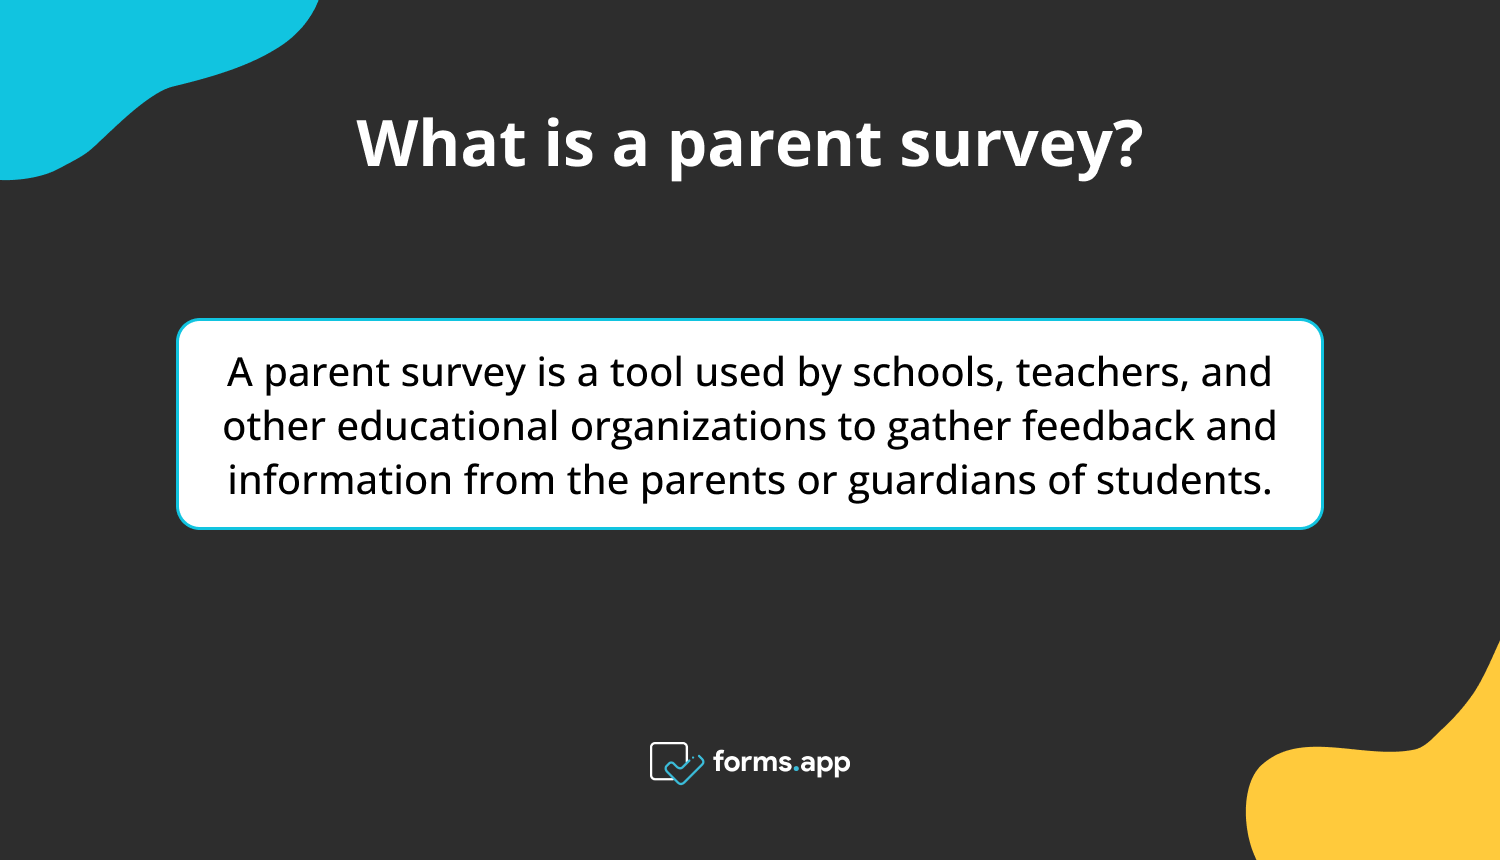 This Teacher 'Favorite Things' Survey is a great tool for parents and PTOs!